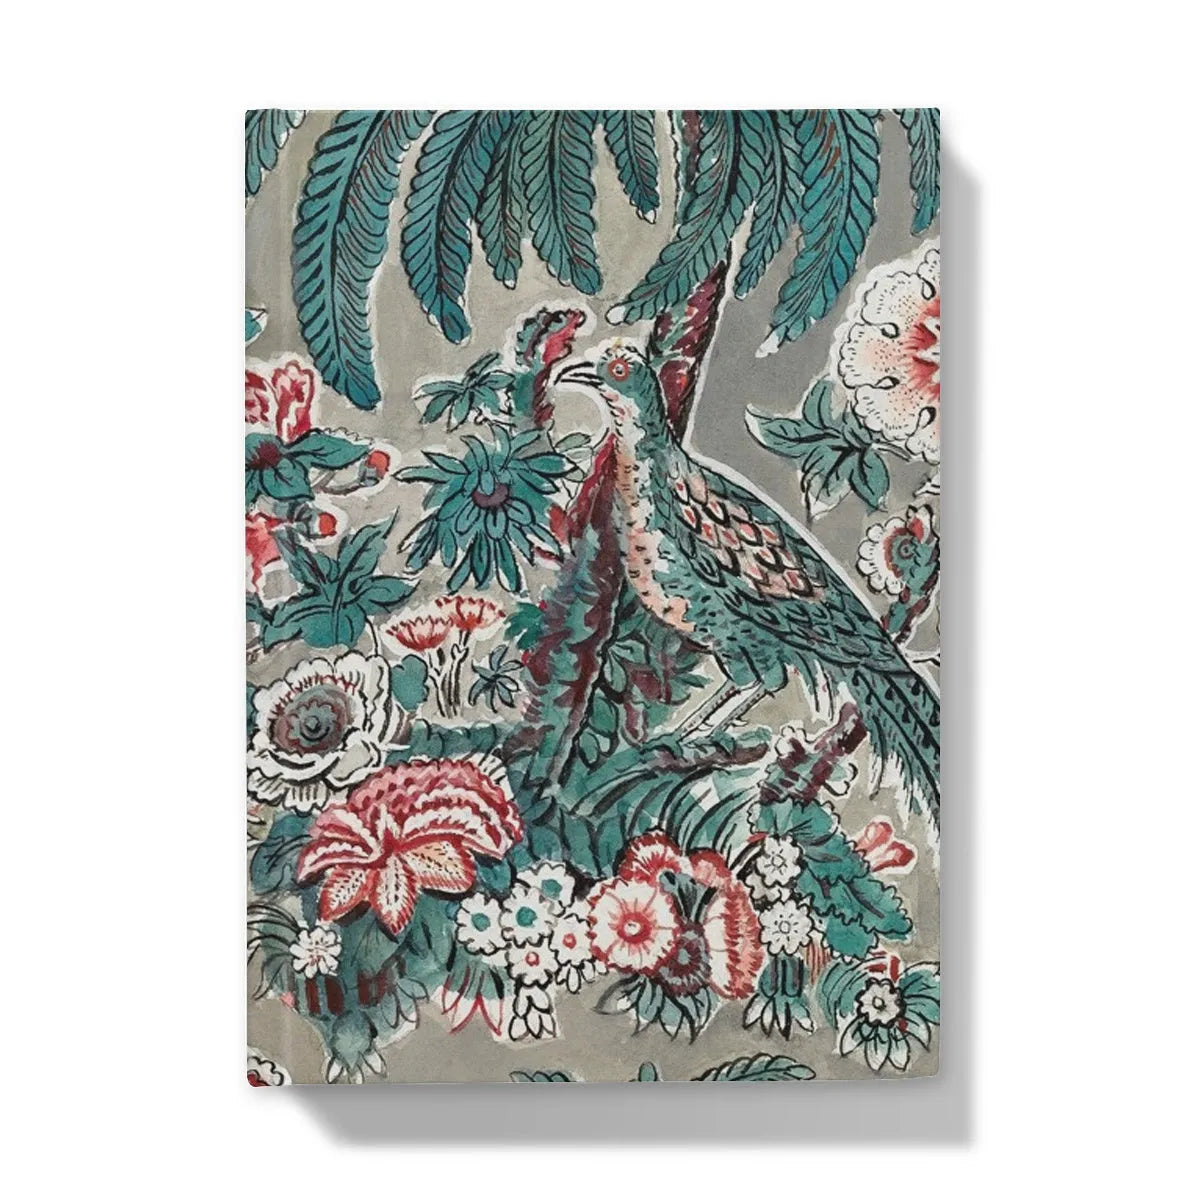 Chintz By George Loughridge Hardback Journal - 5’x7’ / Lined - Notebooks & Notepads - Aesthetic Art